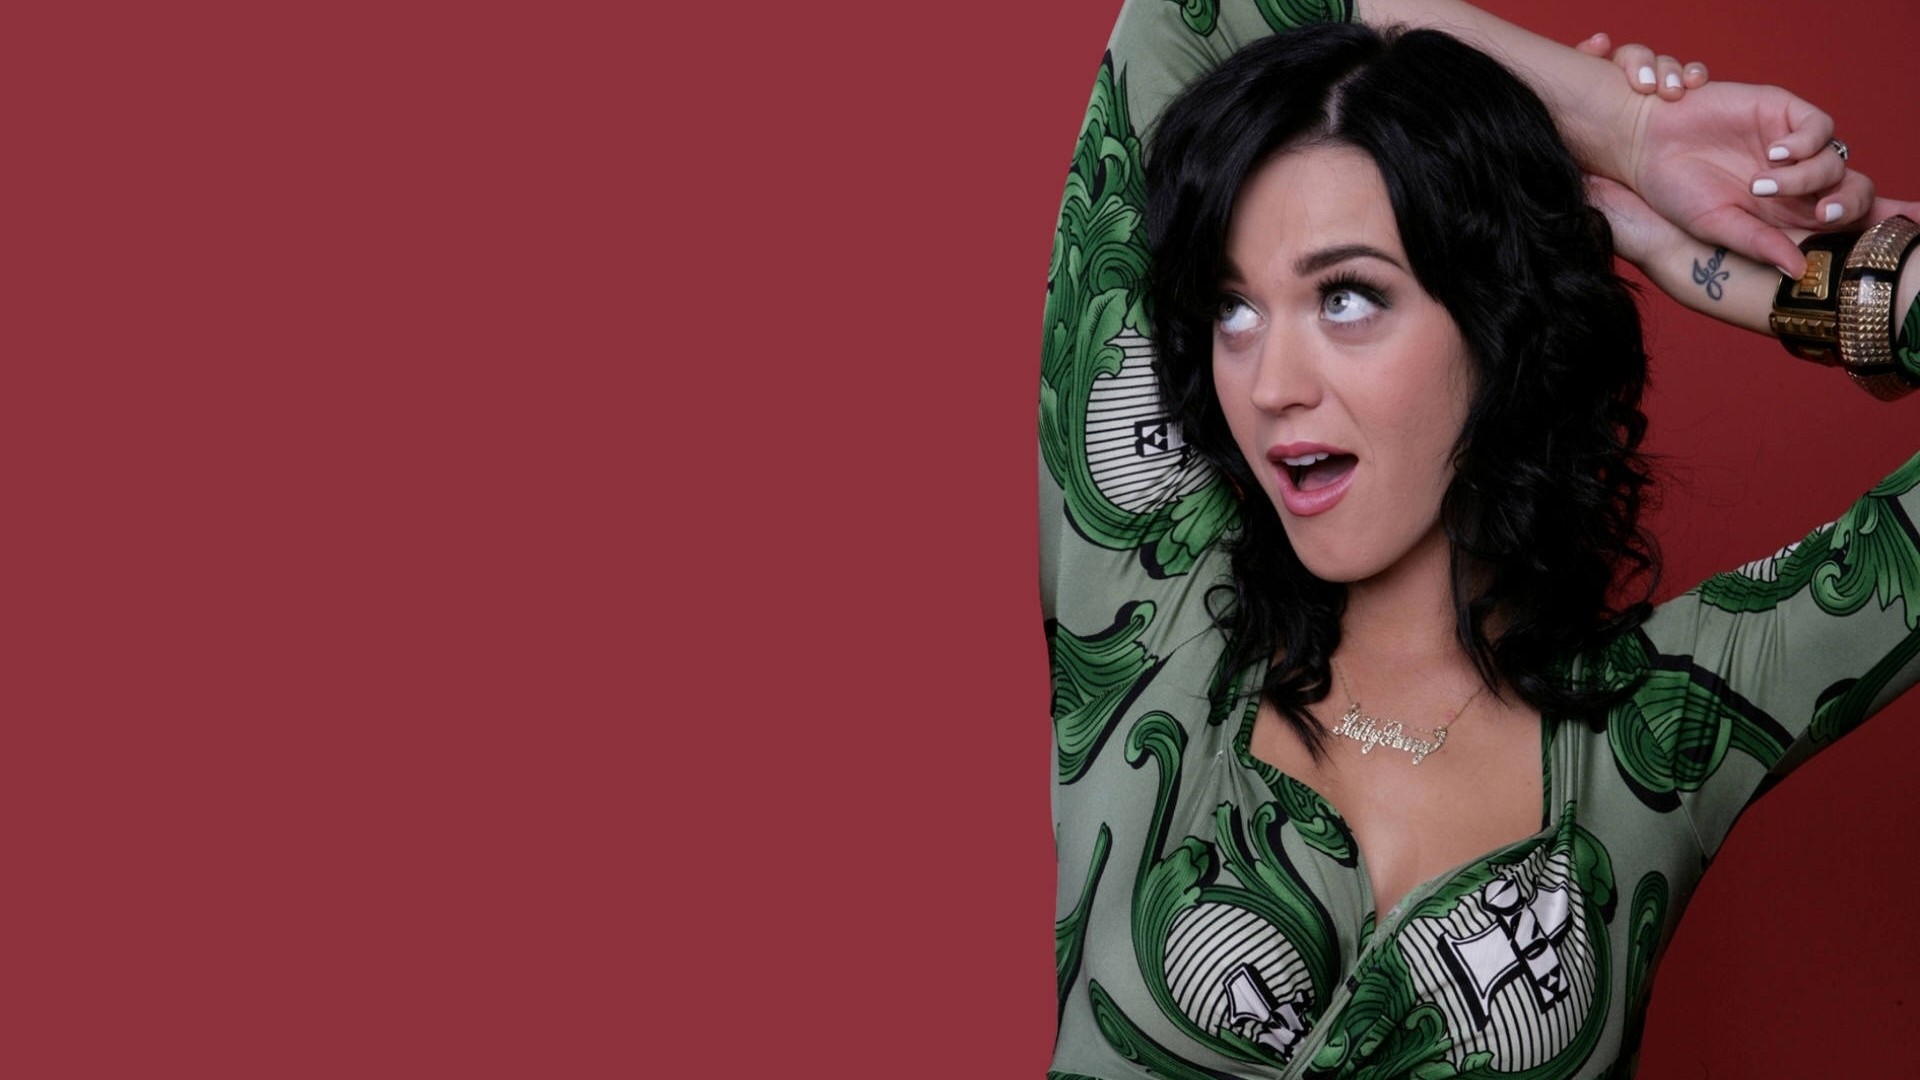 katy perry perfect image for wall paper